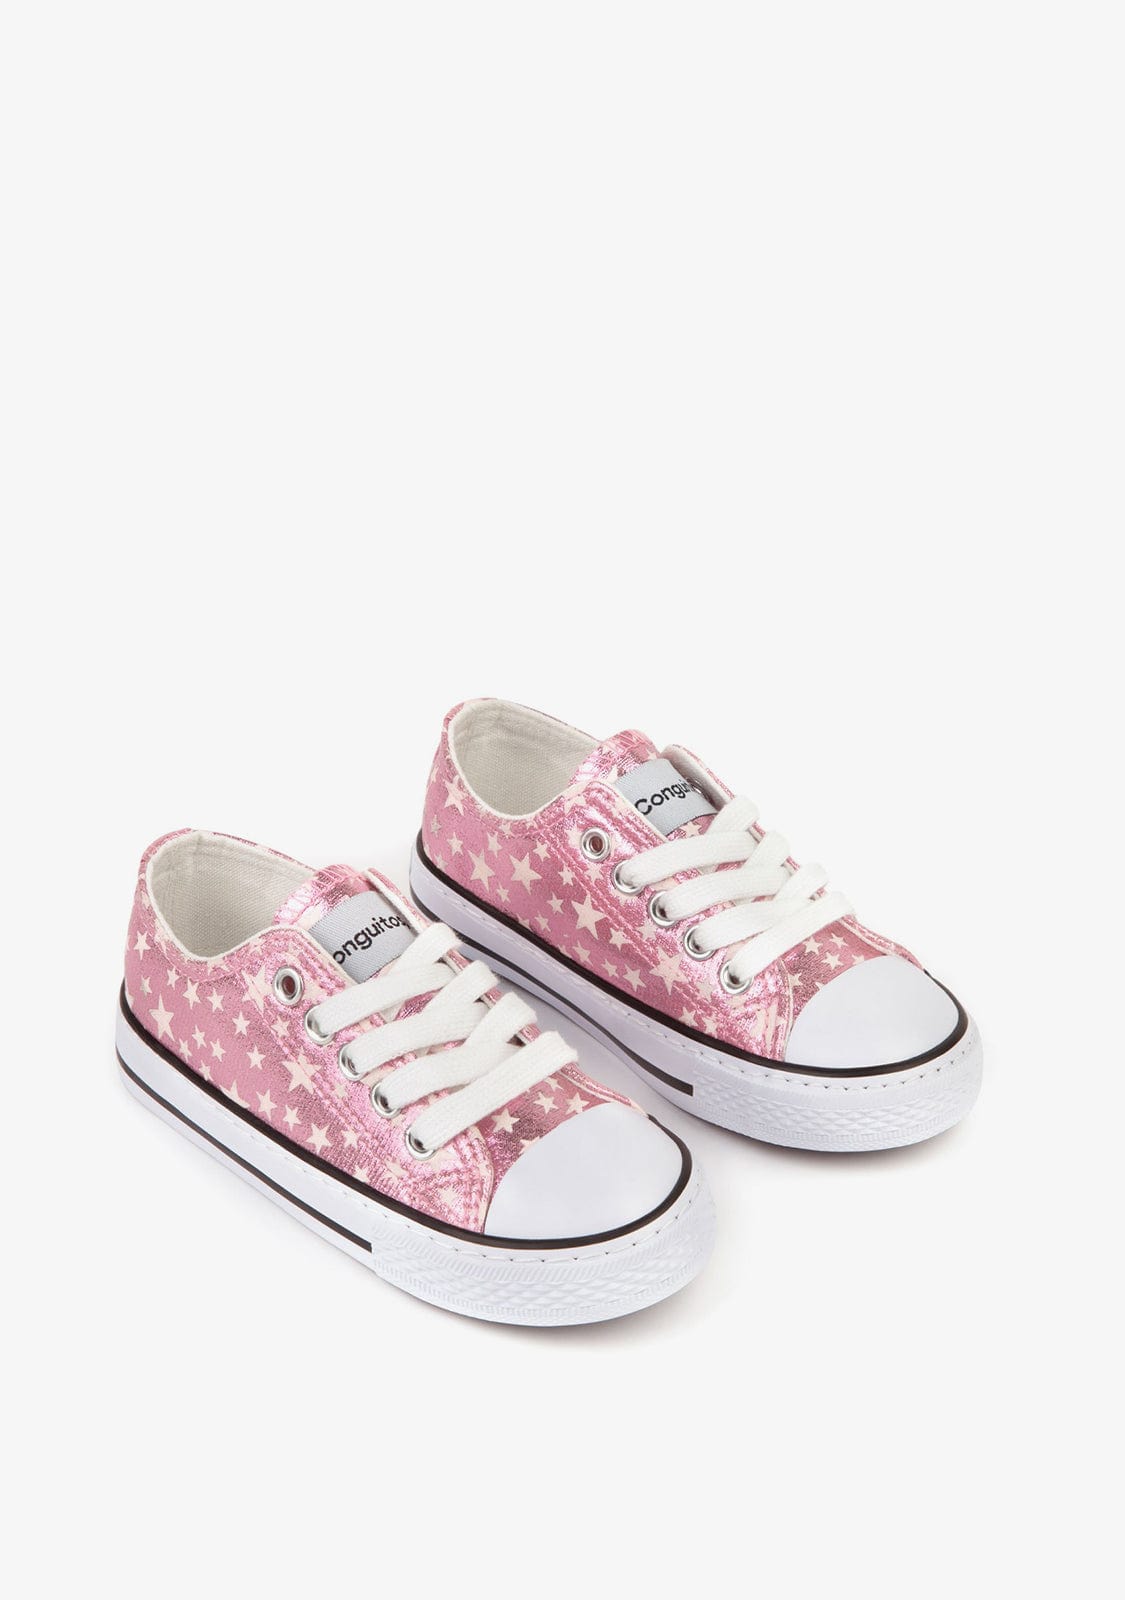 CONGUITOS Shoes Girl's Pink Stars Sneakers